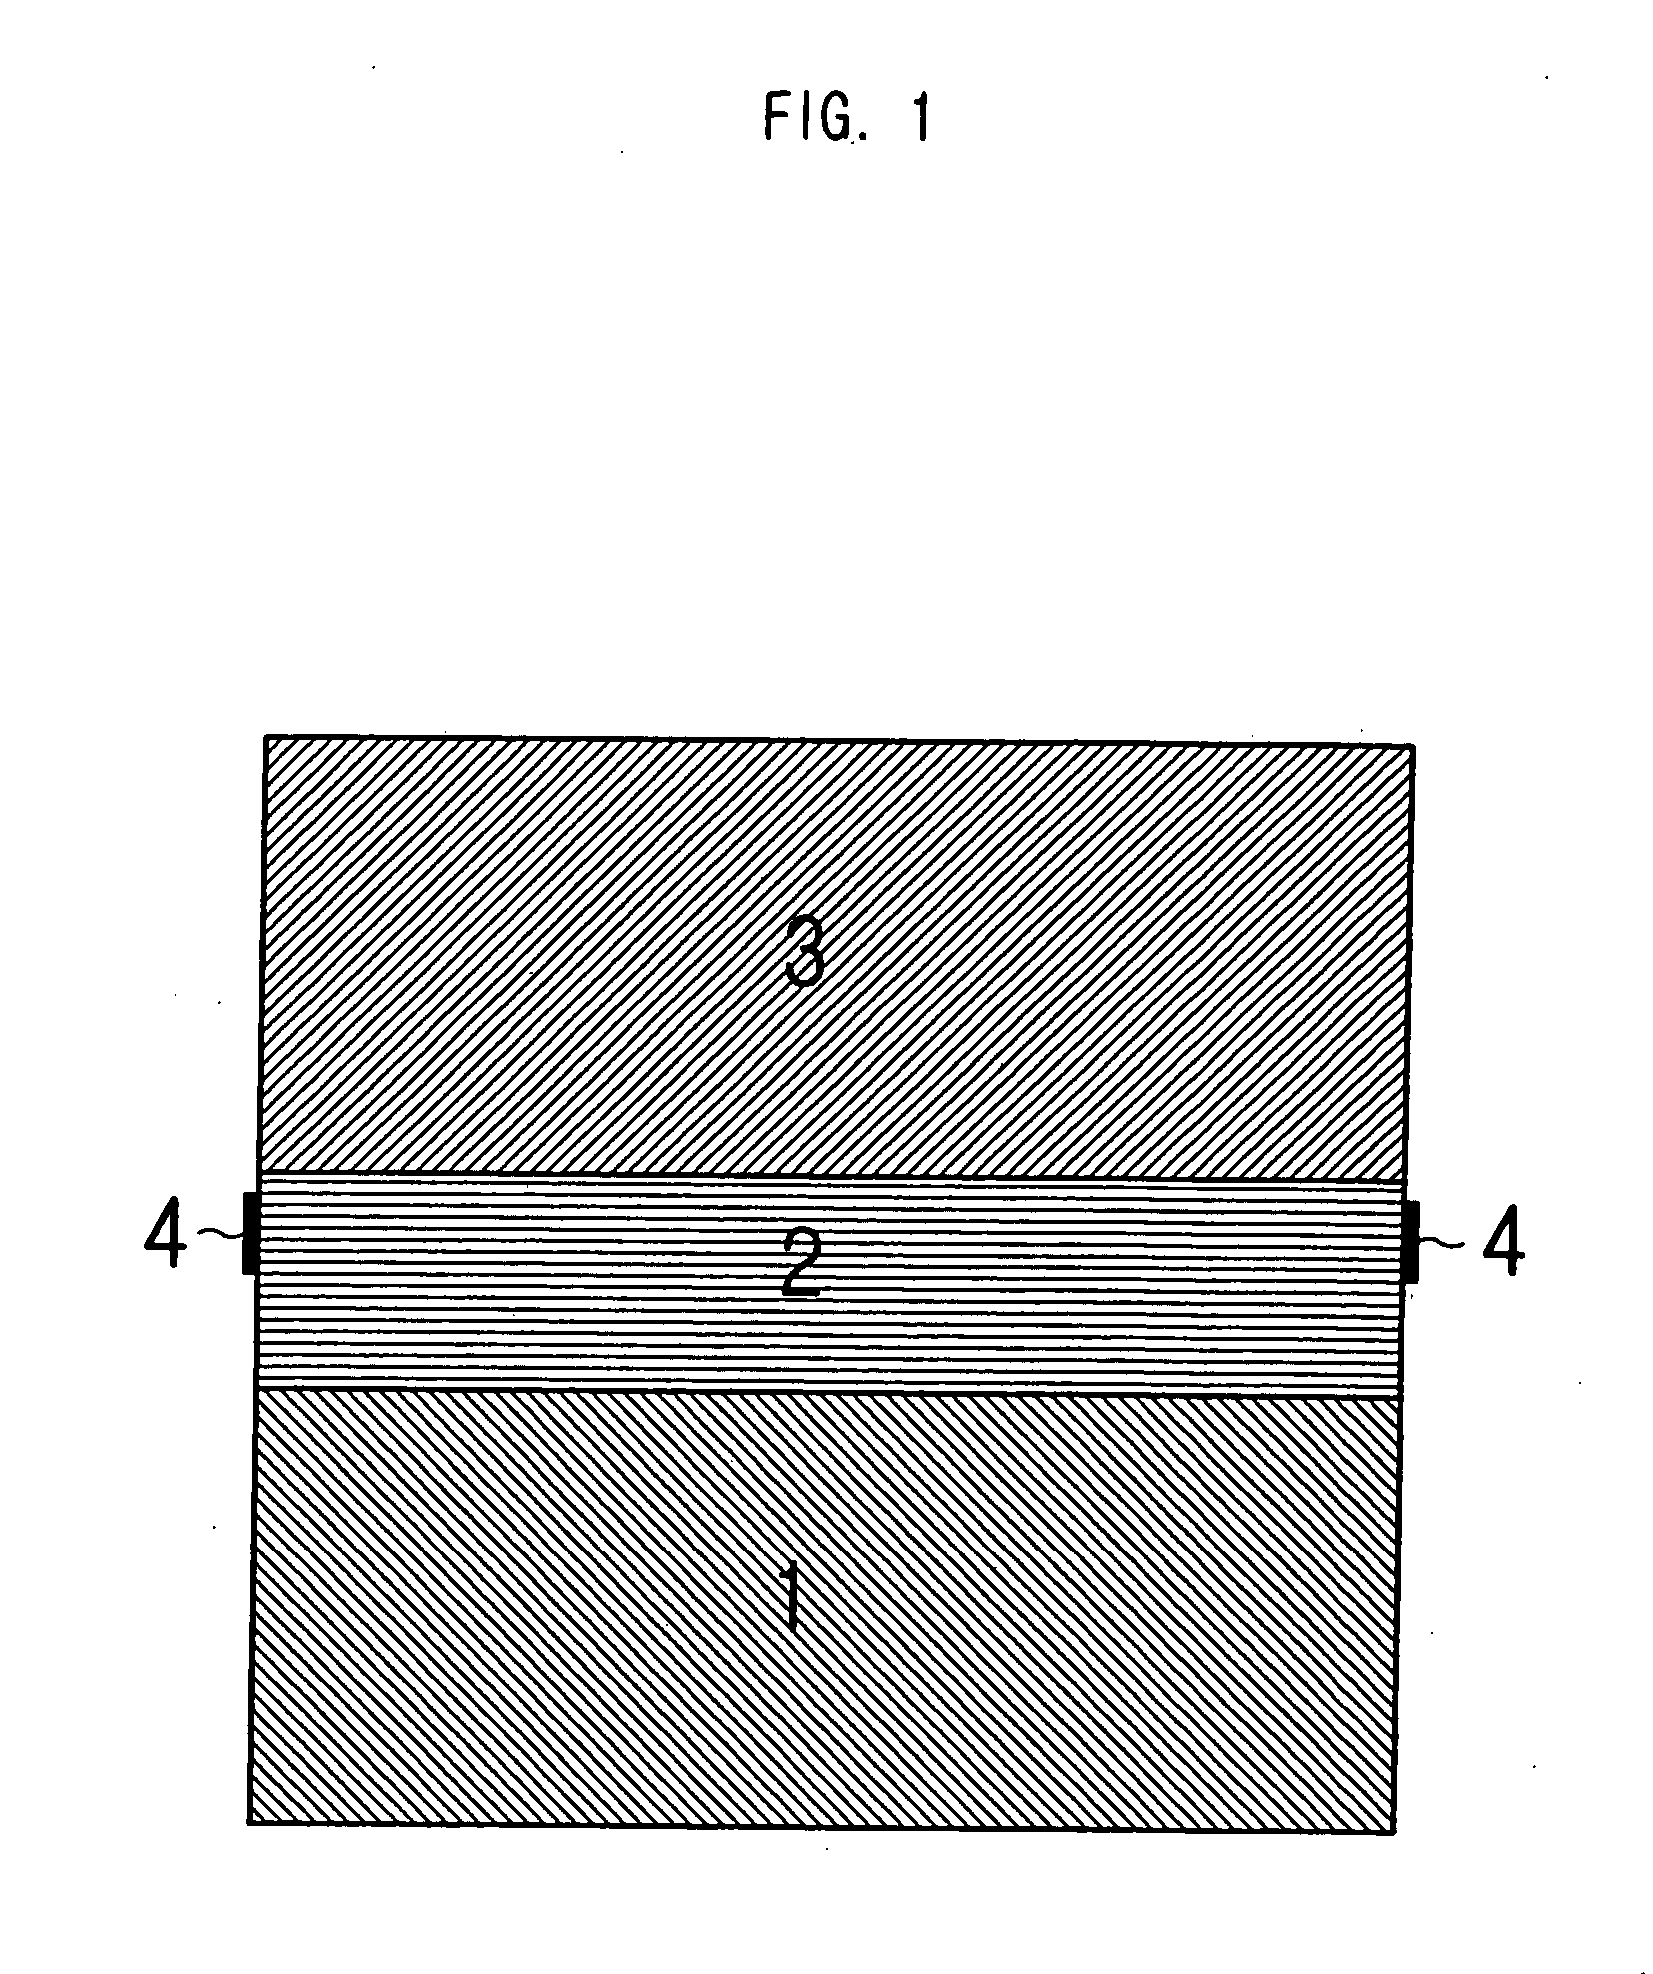 Thermoplastic resin-laminated structure, method for preparation and use thereof